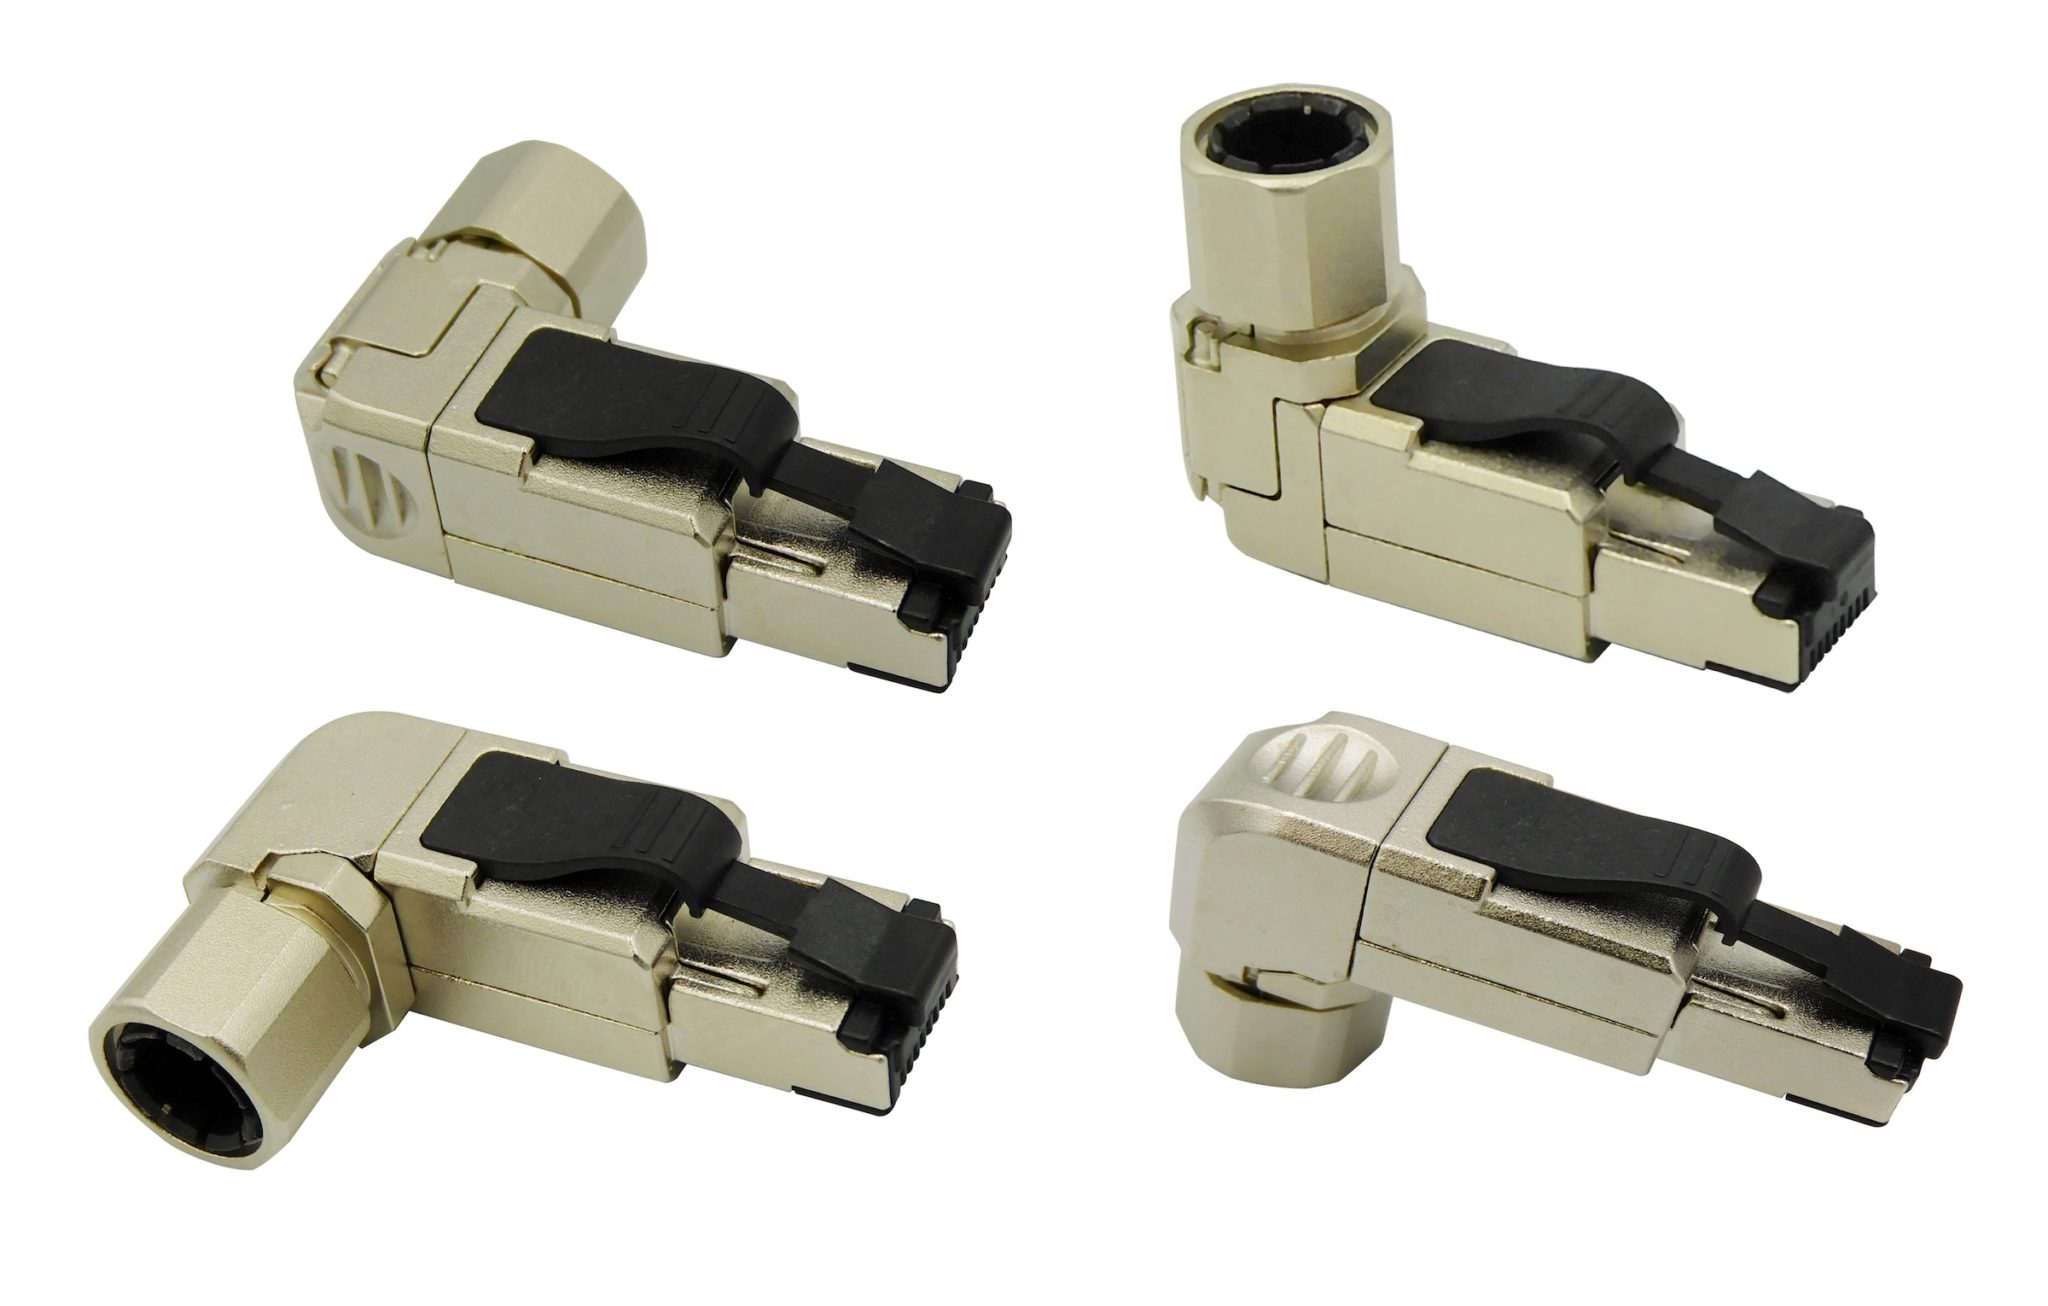 Stewart Connector’s new Cat 6 and Cat 6A Multi-Axis RJ45 punch-down modular plugs